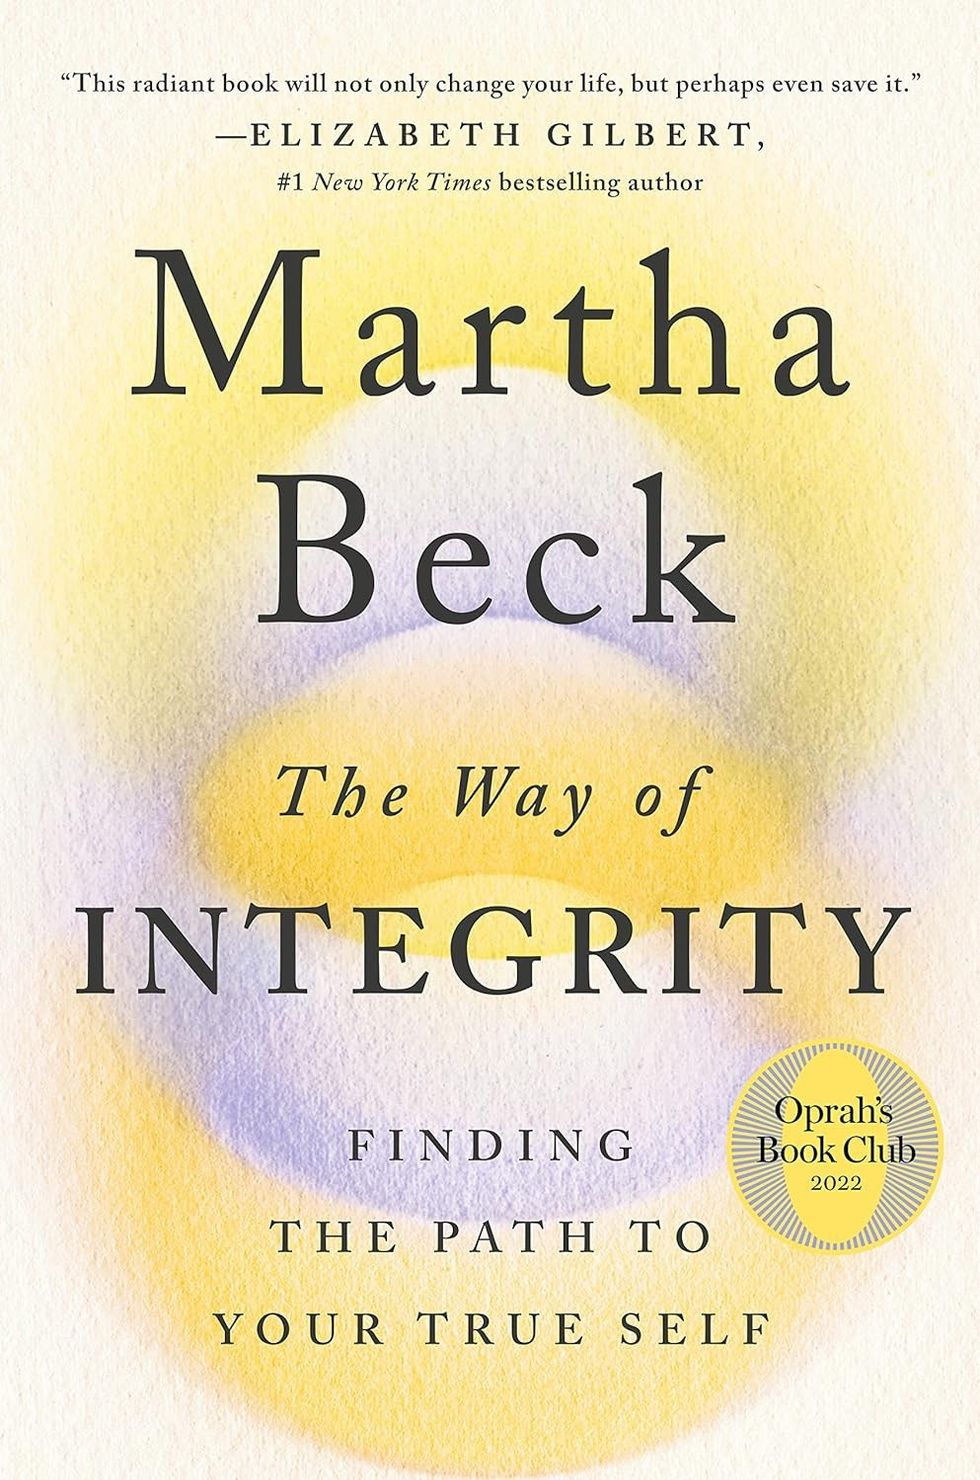 "The Way of Integrity: Finding The Path to Your True Self" by Martha Beck